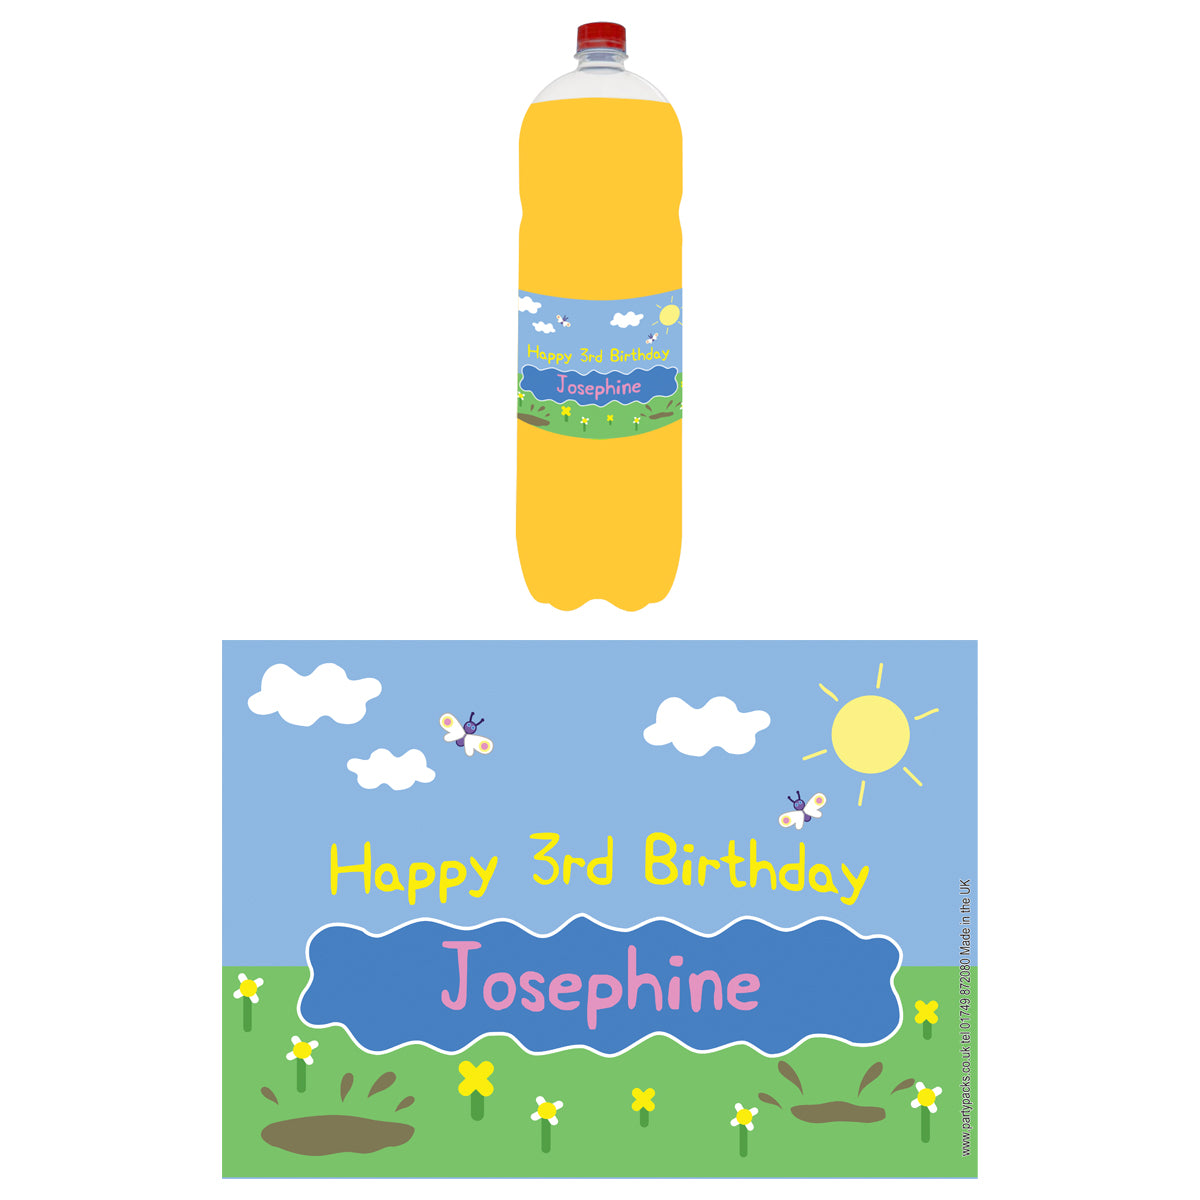 Personalised Bottle Labels - Muddy Pig - Pack of 4